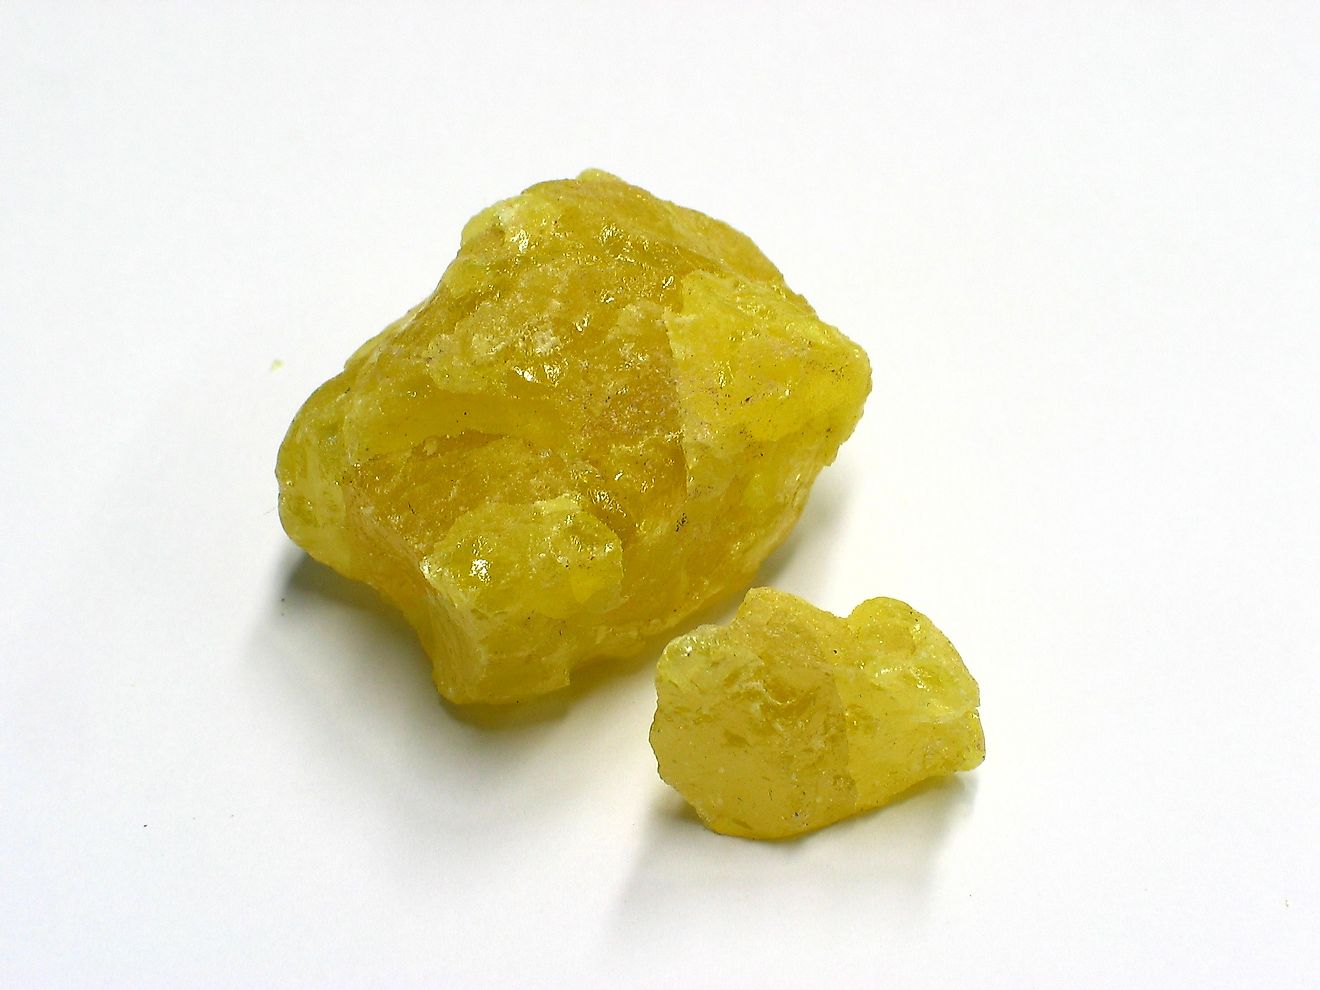 Crystals of Sulfur, a solid chemical element with atomic number 16 on the periodic table